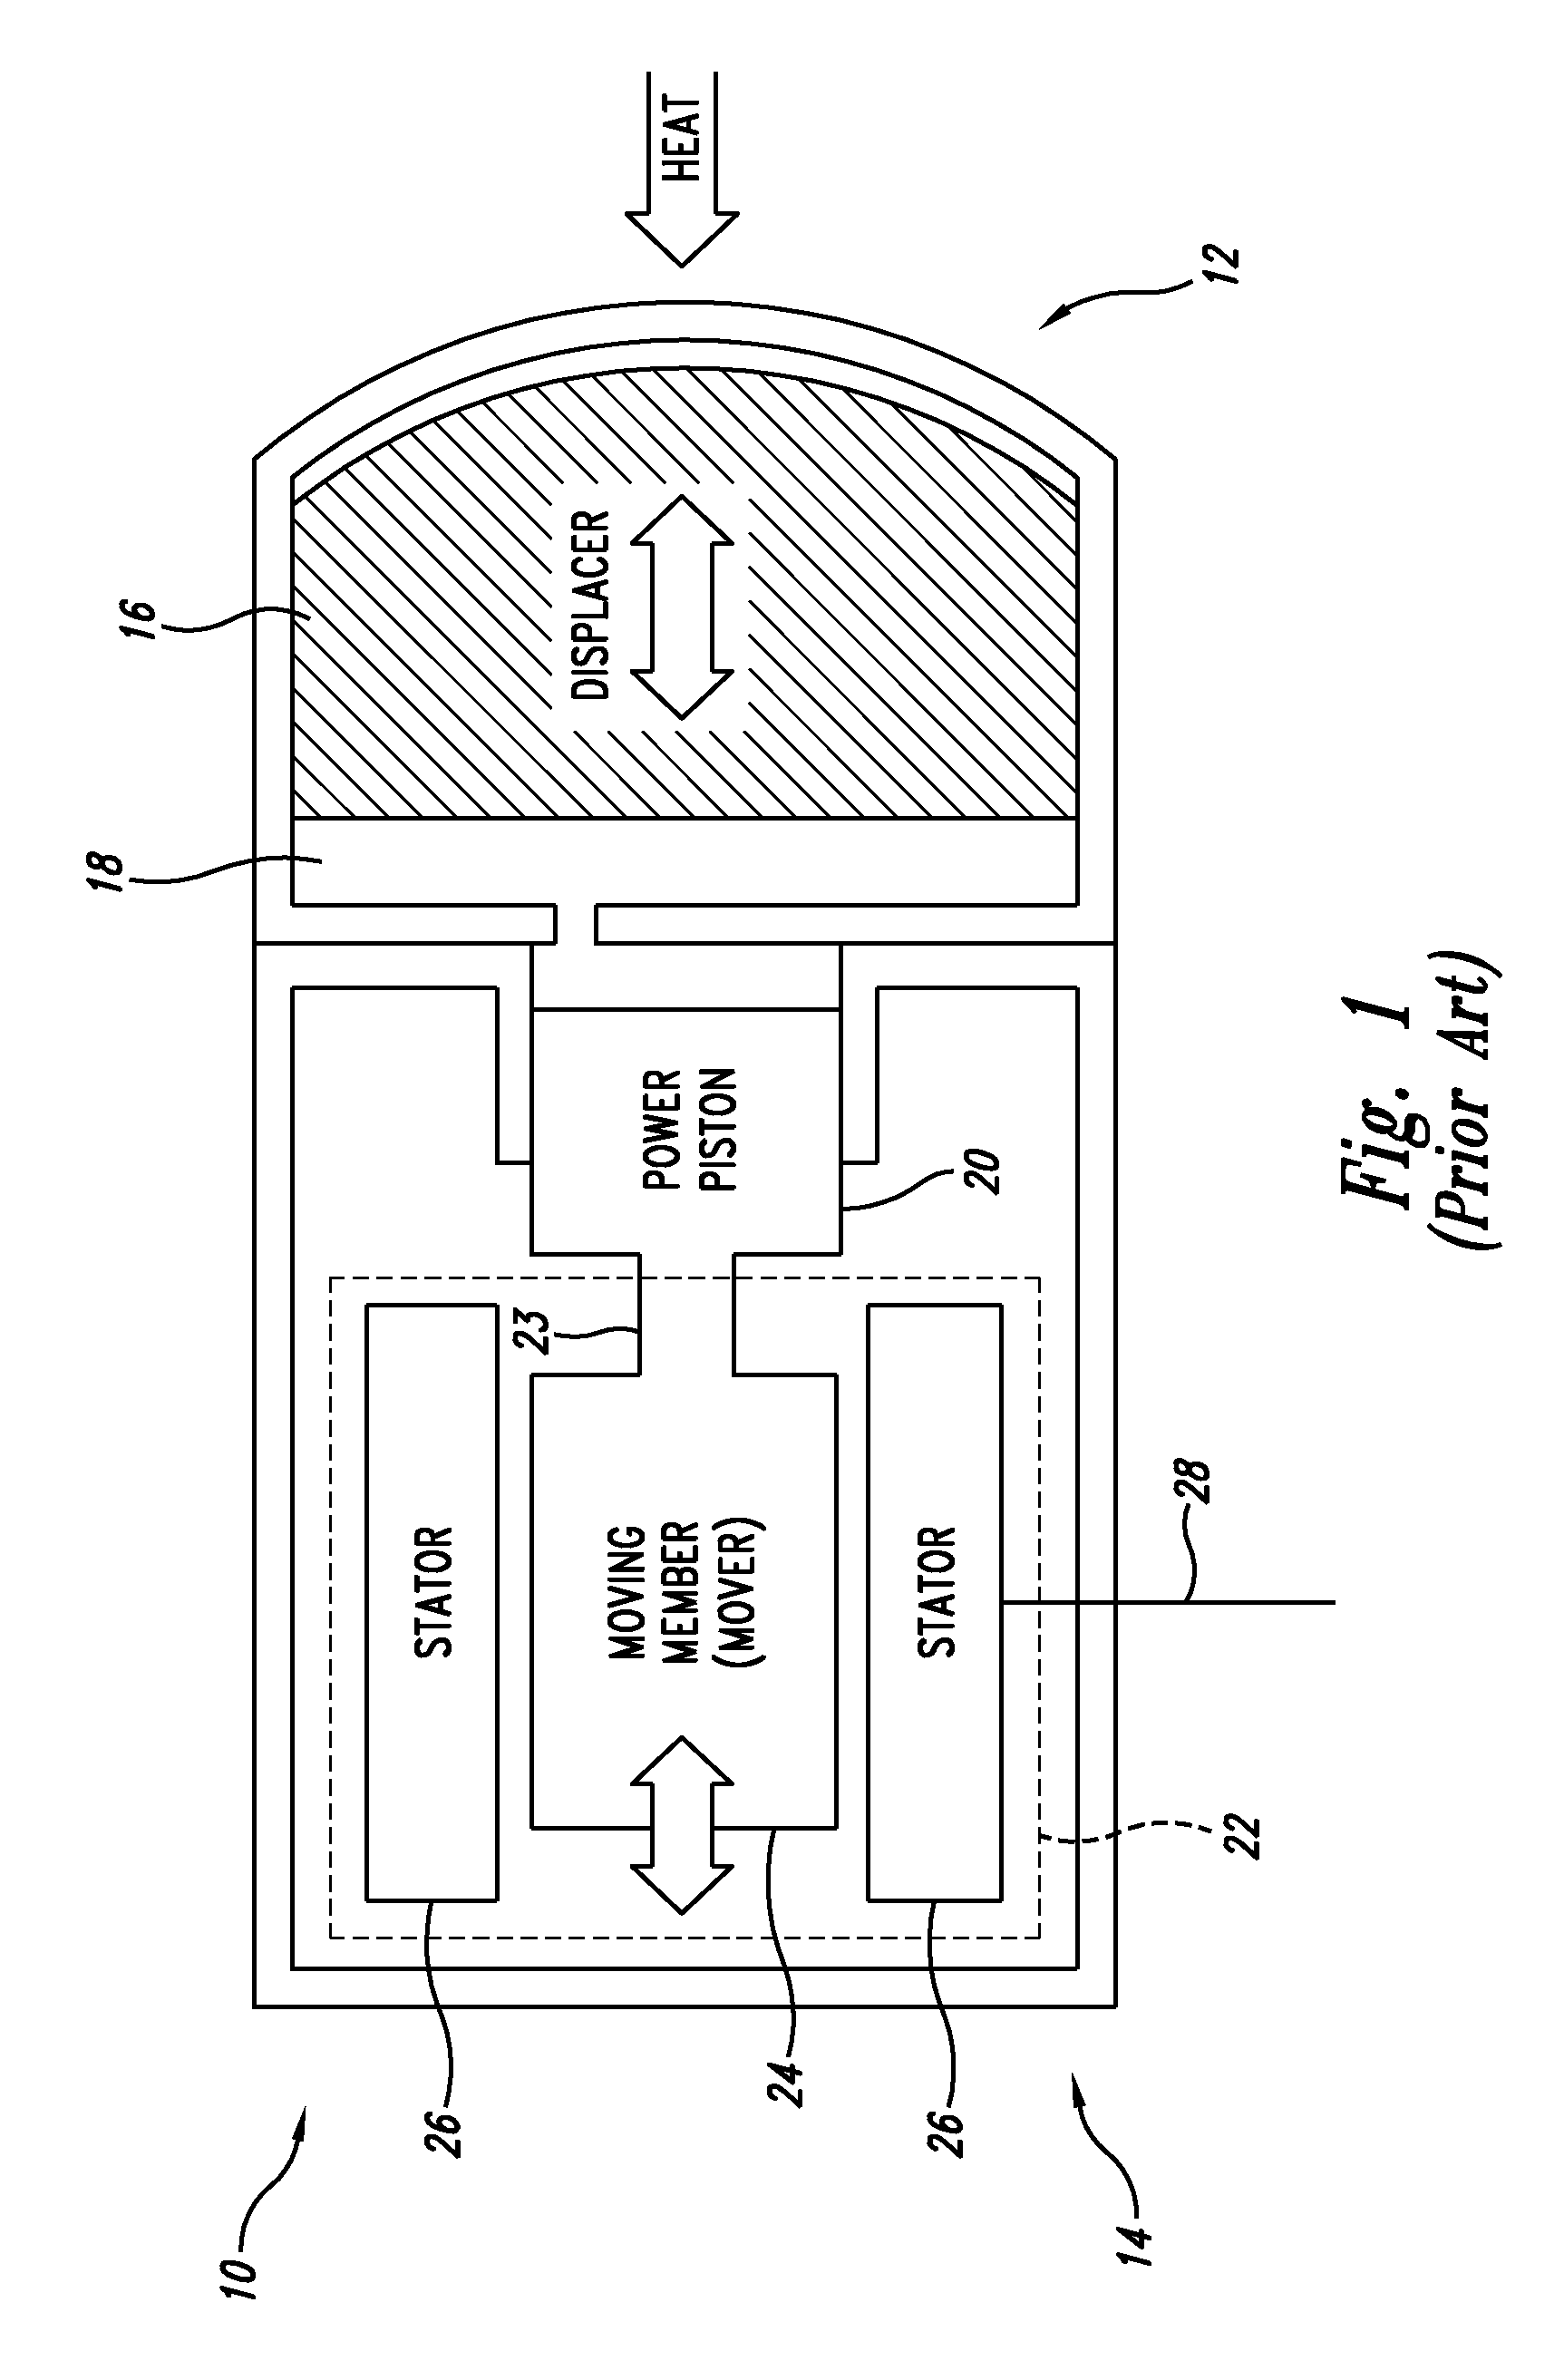 Linear electrodynamic system and method